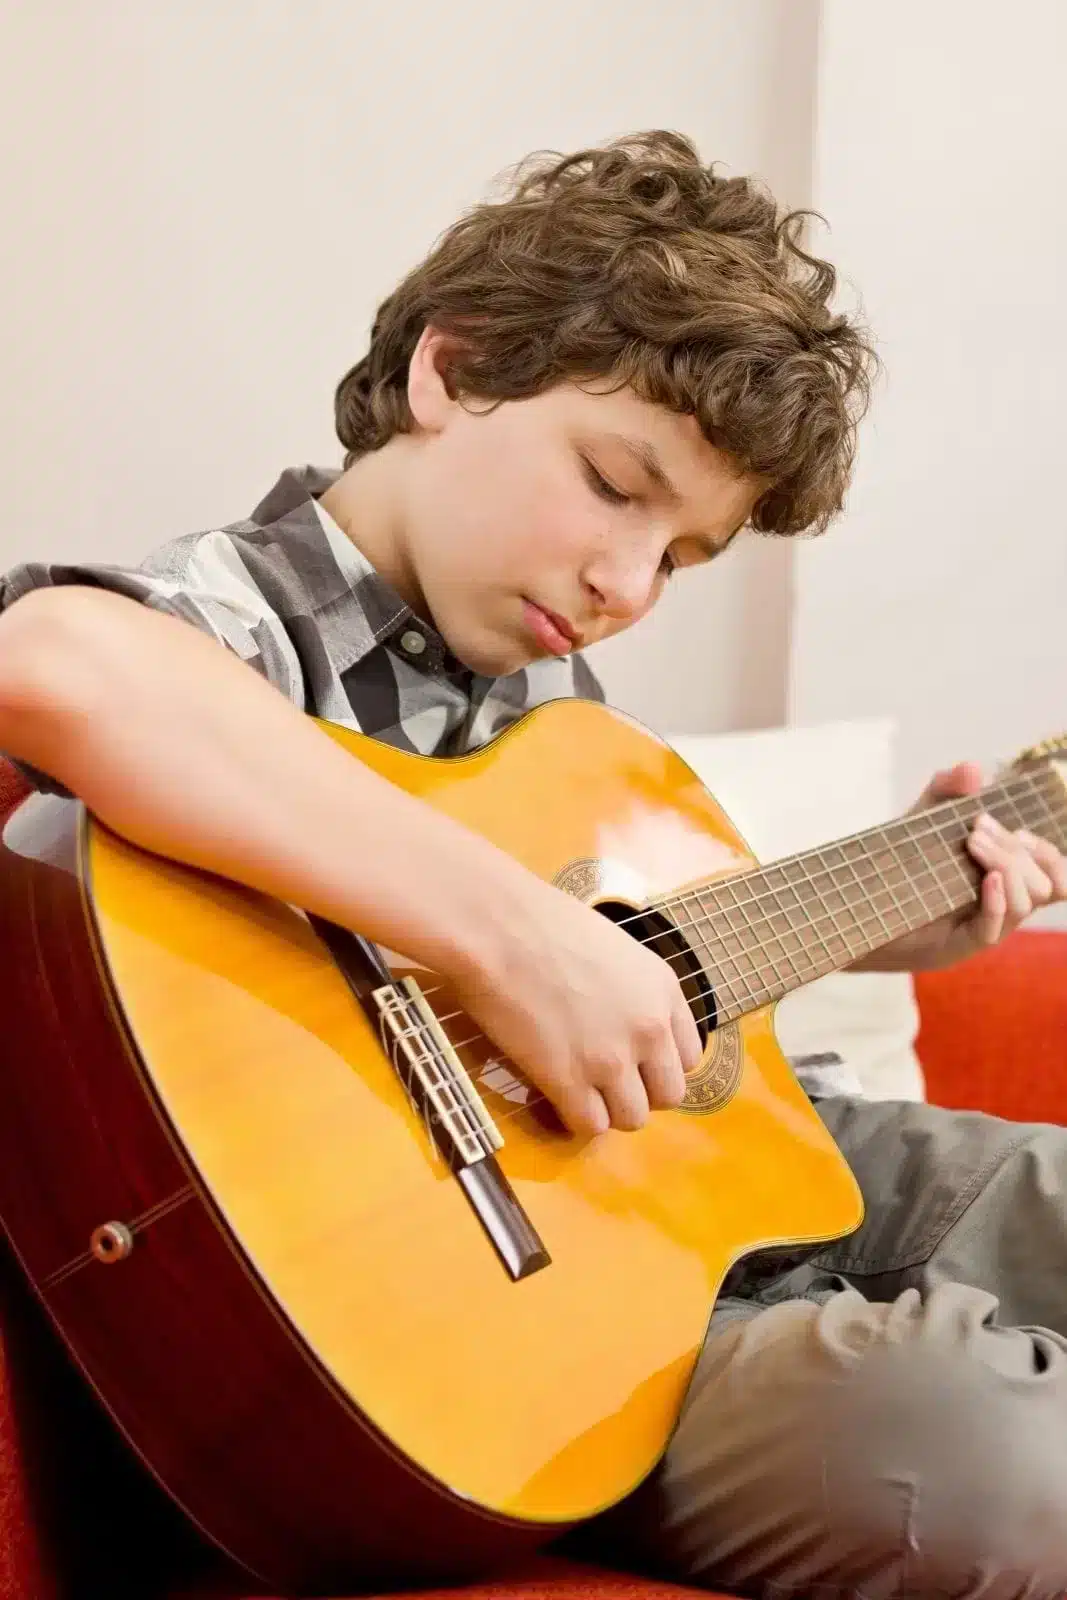 A Teenager playing guitar